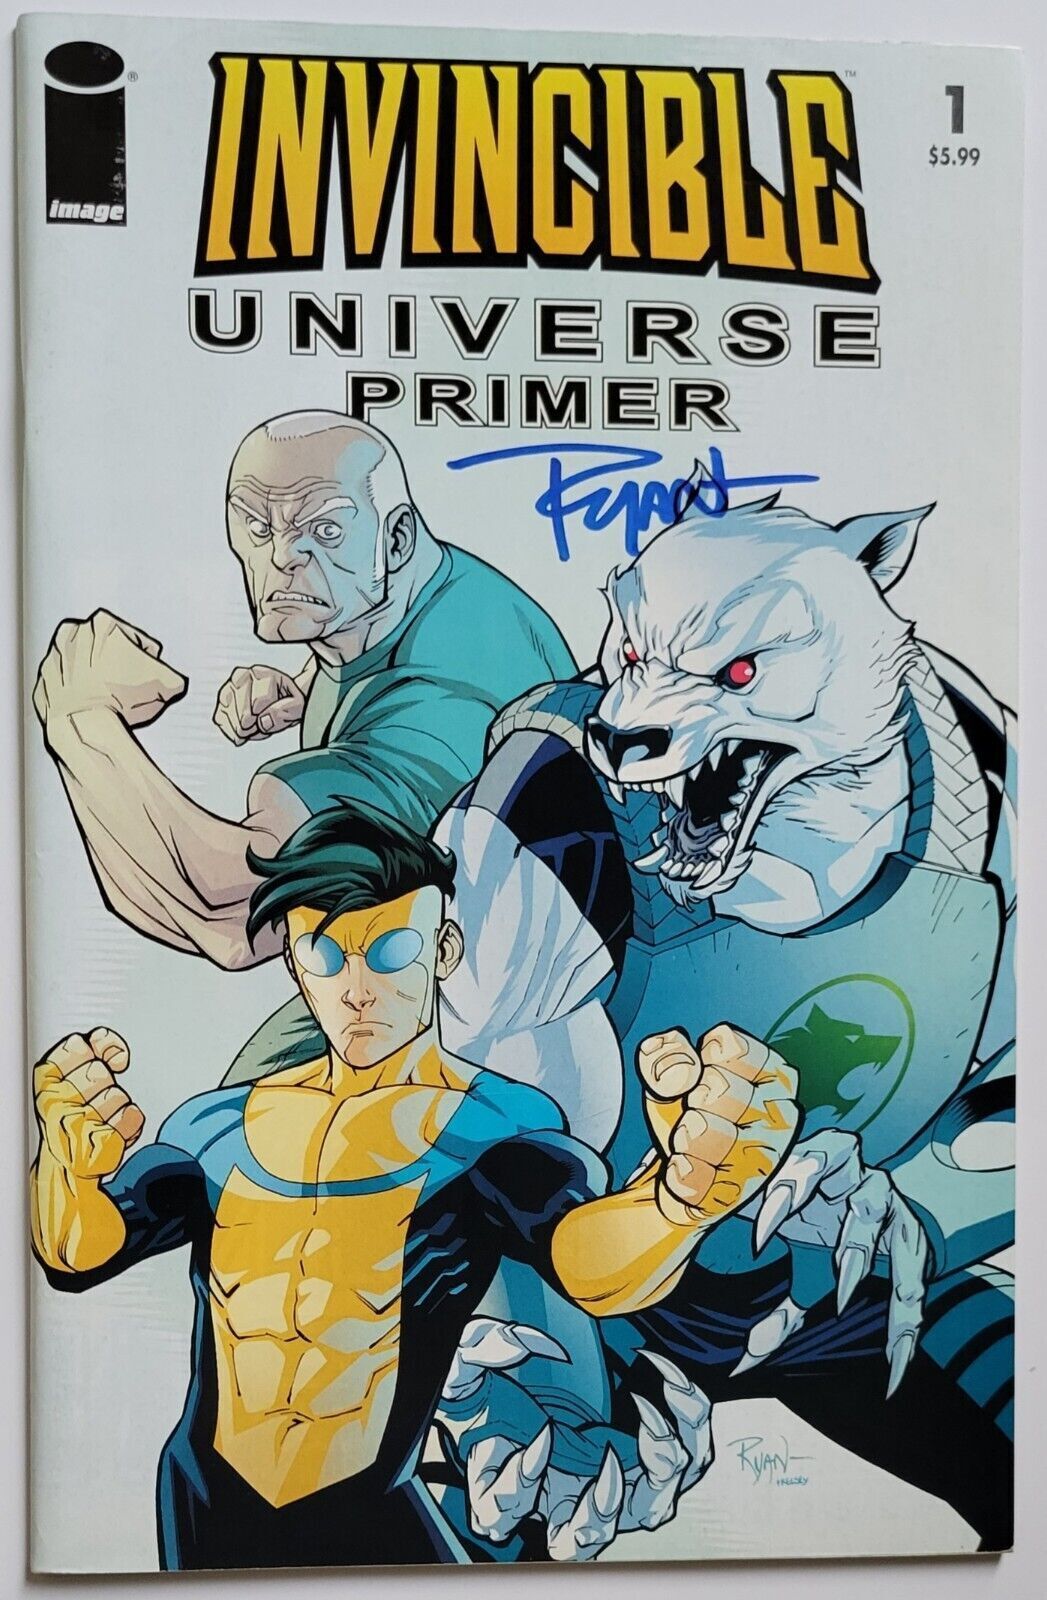 Invincible Image You Pick 0-144 Best Selection/ tons of 2nd prints & variants